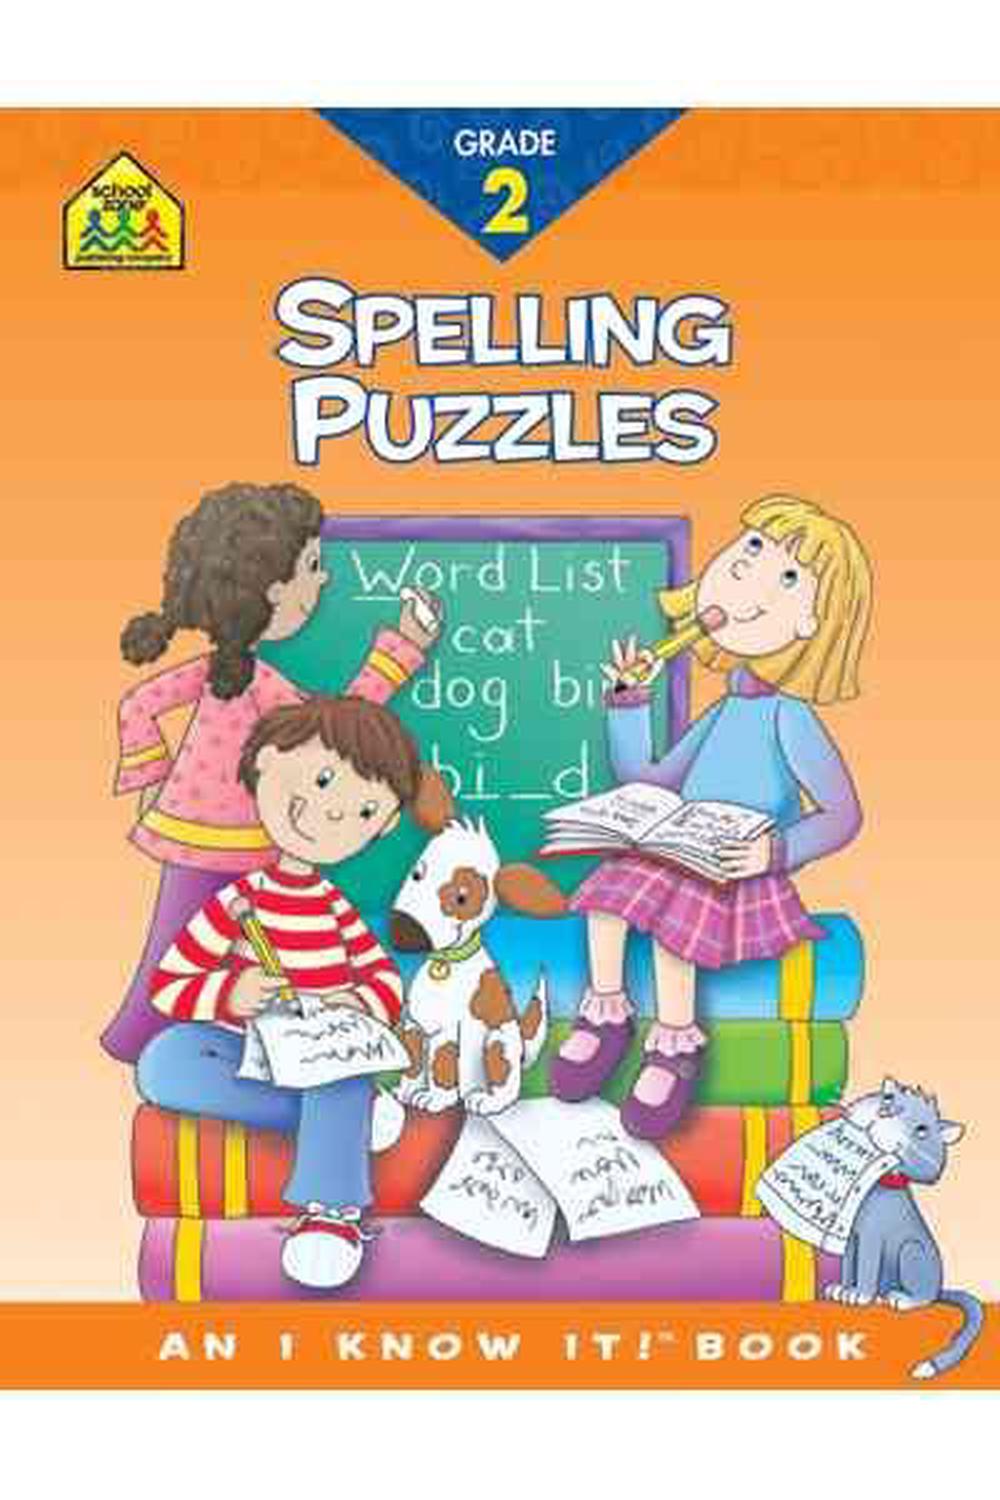 Spelling Puzzles 2 by Jean Syswerda (English) Paperback Book Free